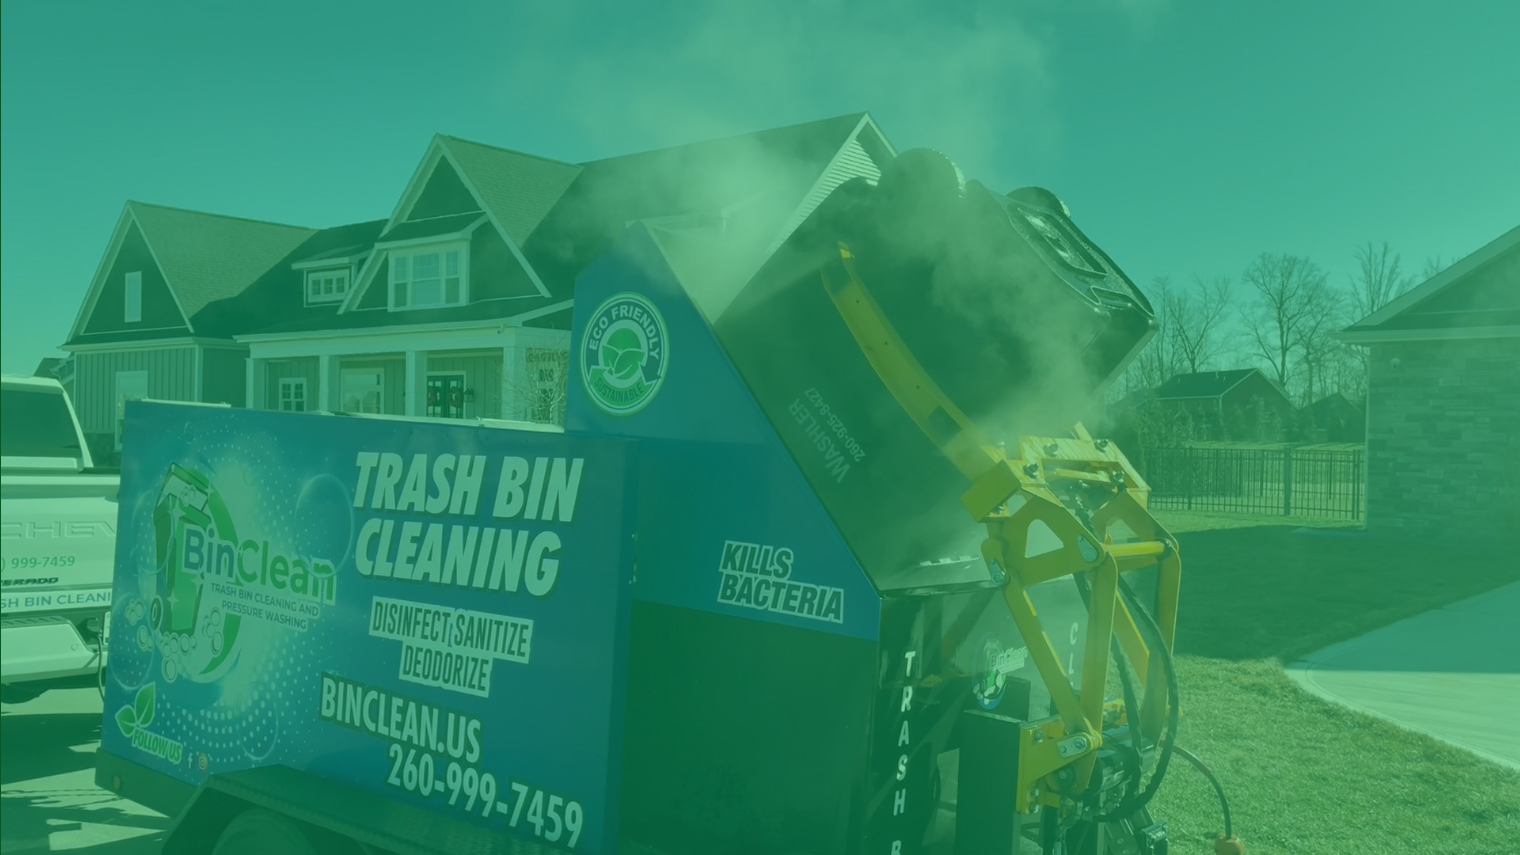 images/TRASH_BIN_CLEANING_SERVICES_OHIO_INDIANA.jpg